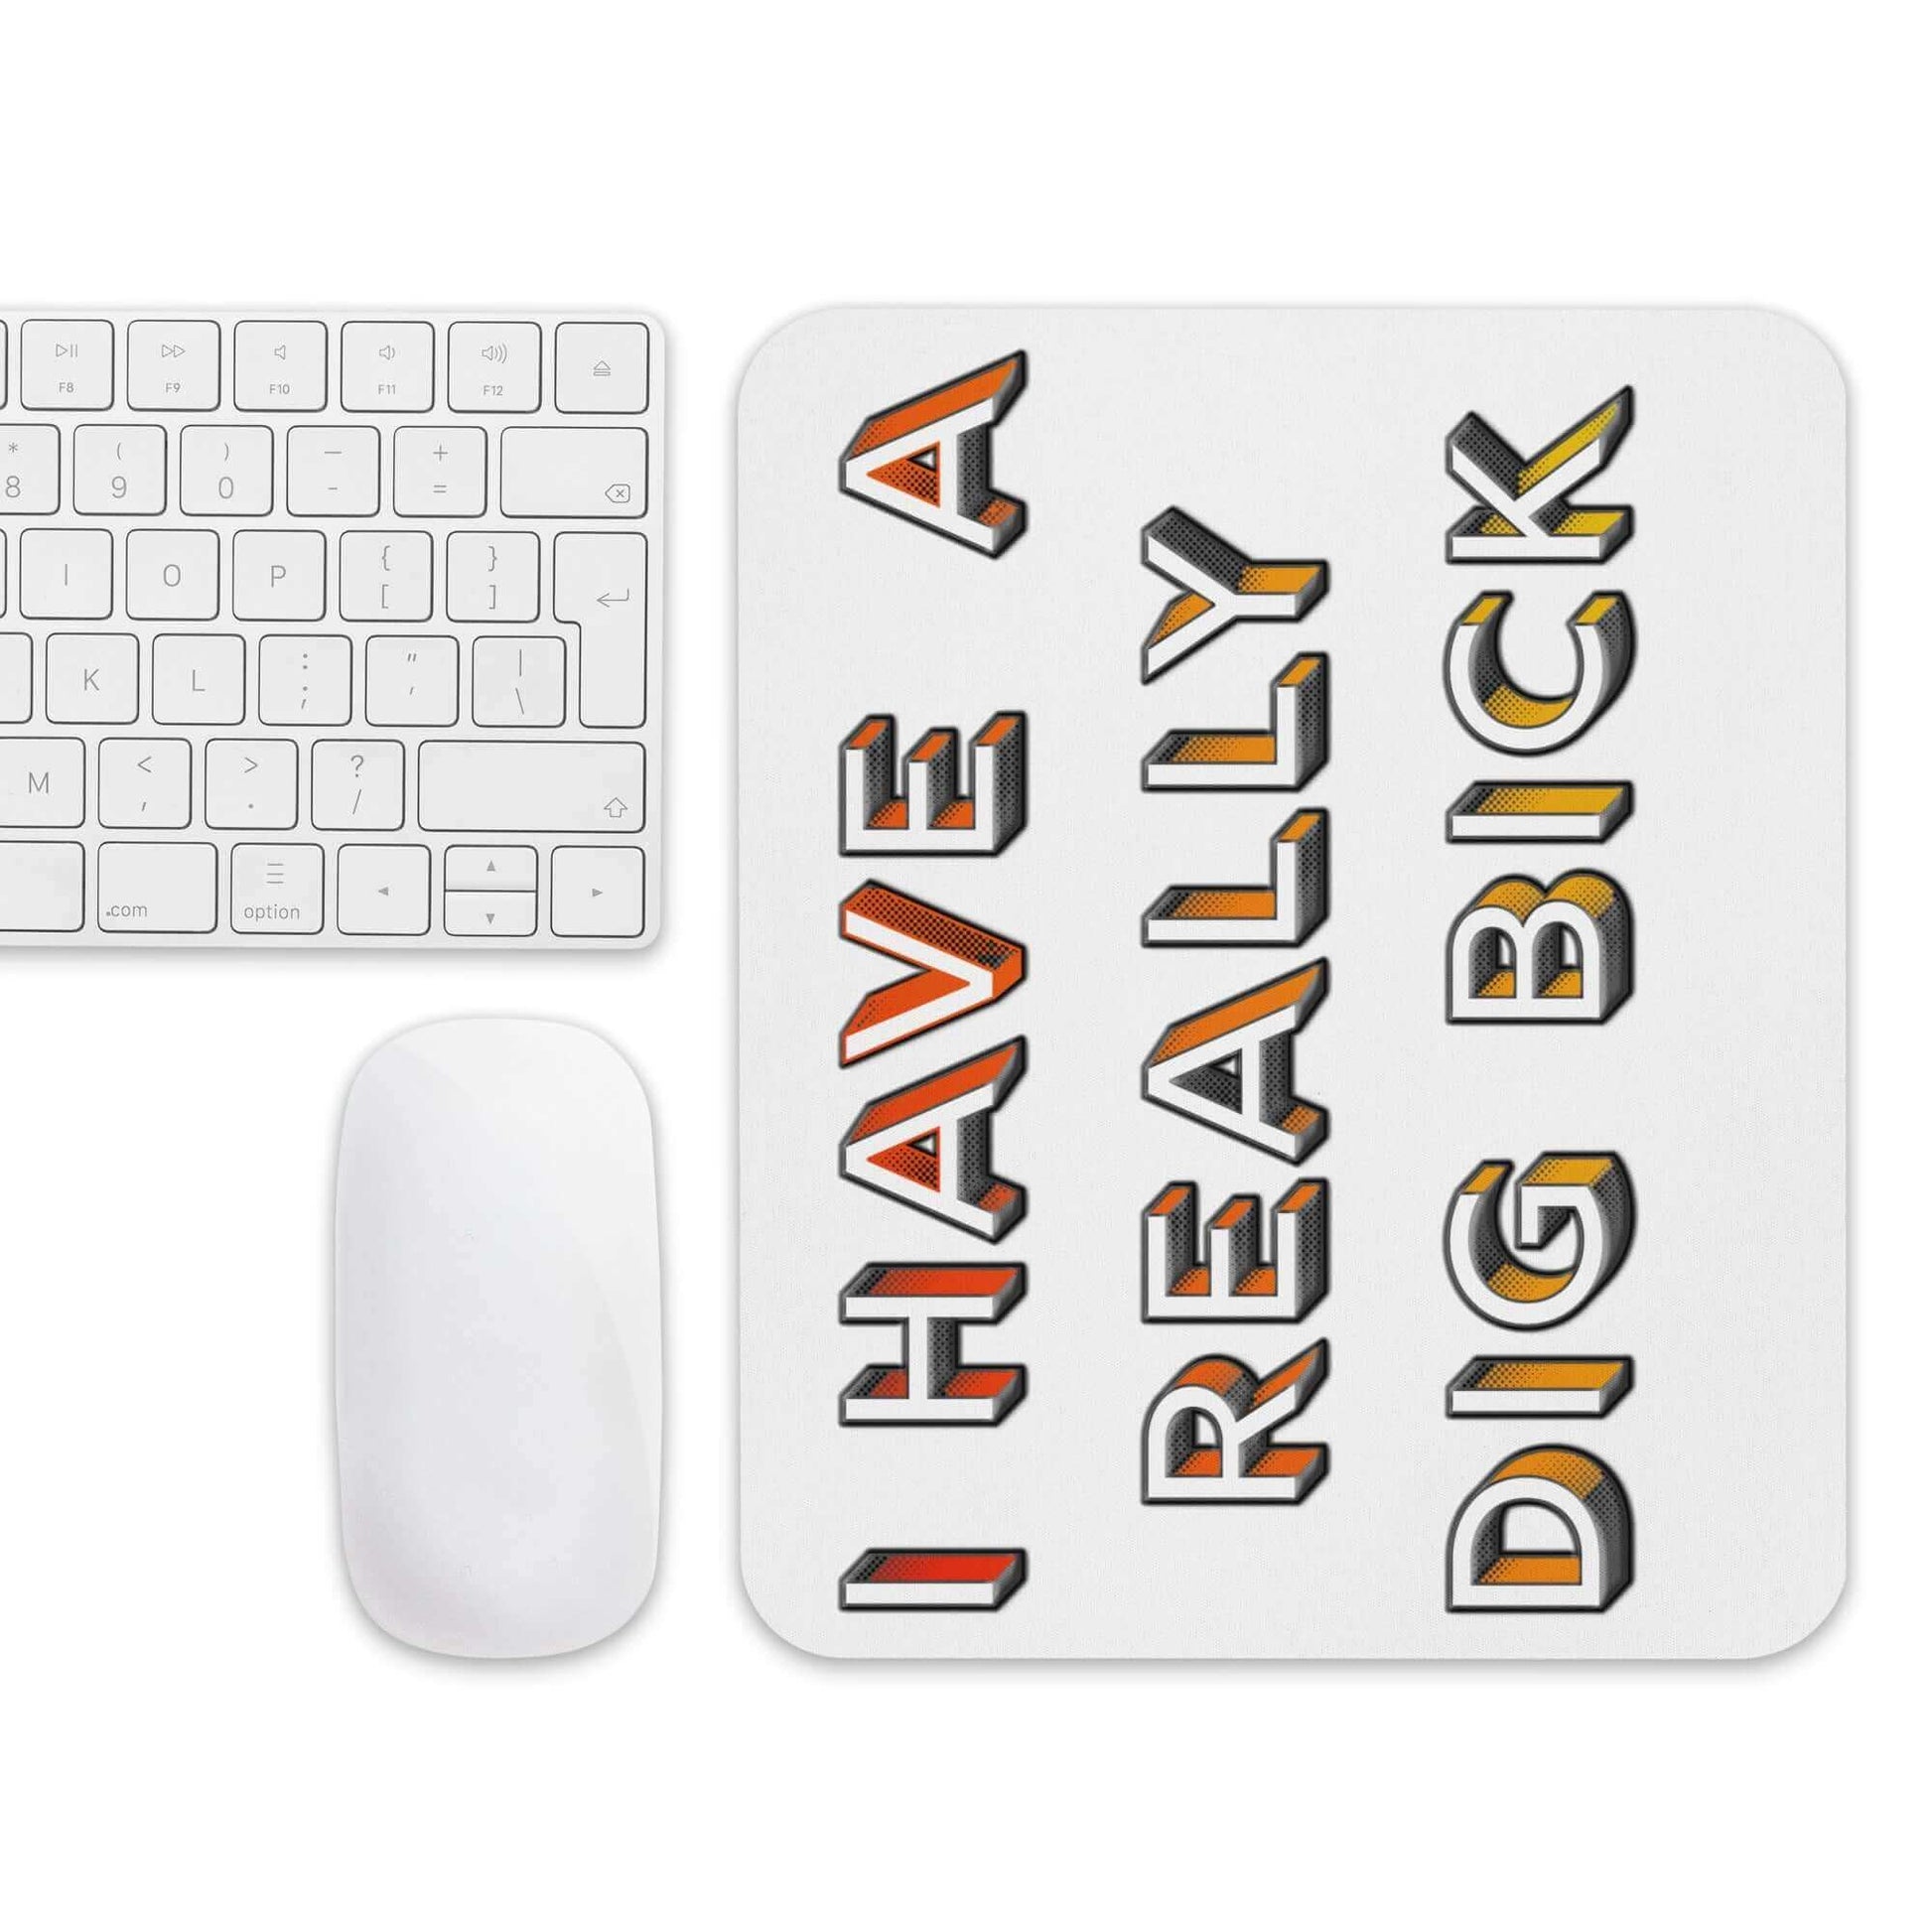 I have a really dig bick - Mouse pad - Horrible Designs